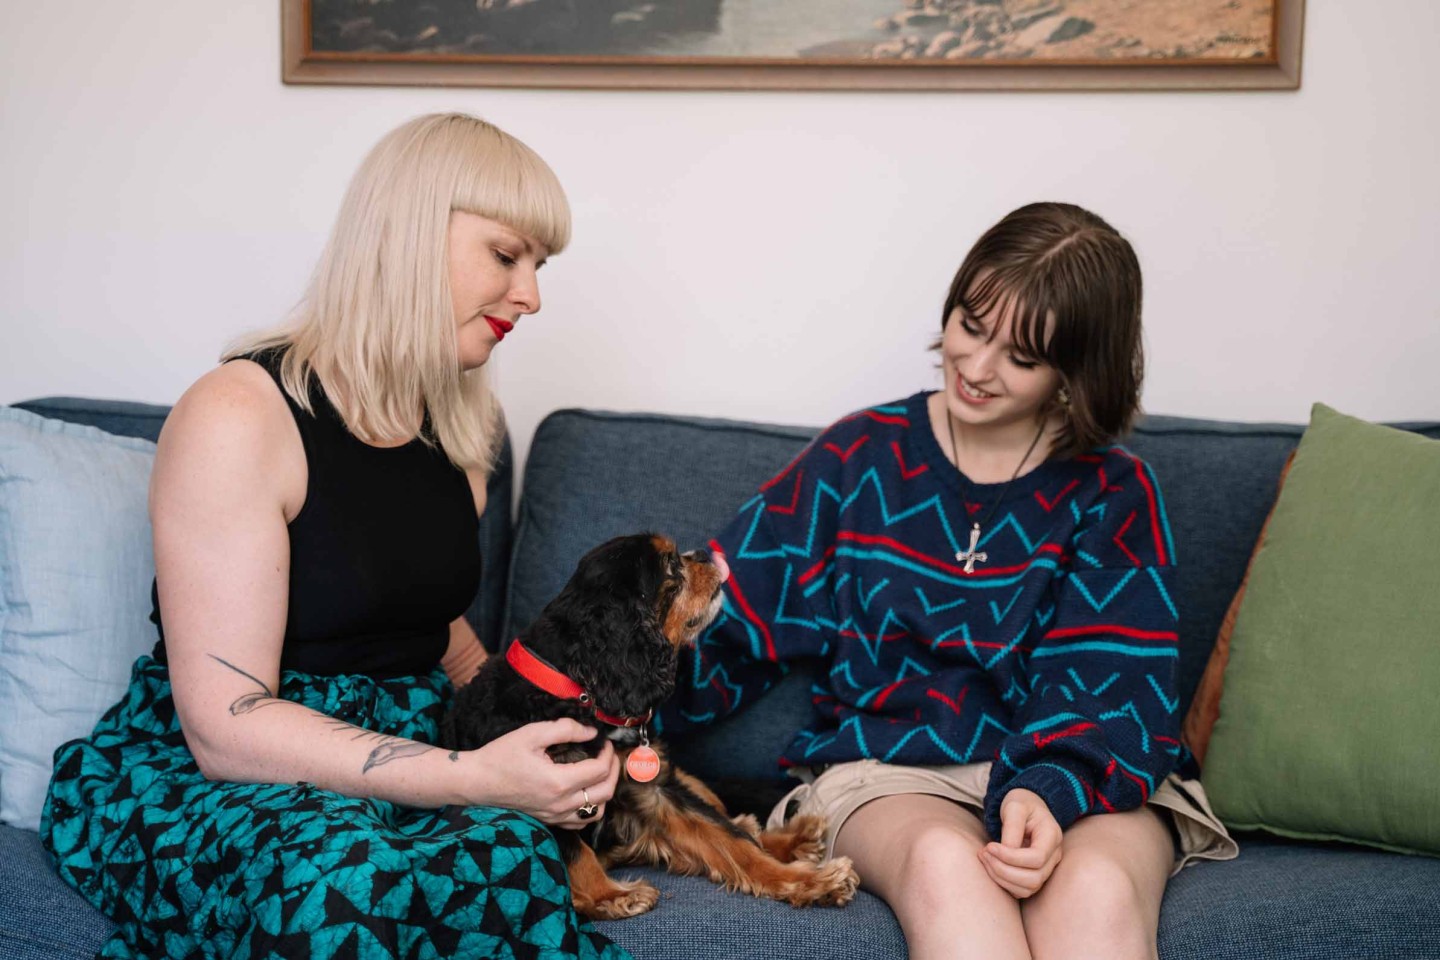 An adult and their young adult sitting on a couch, petting a dog